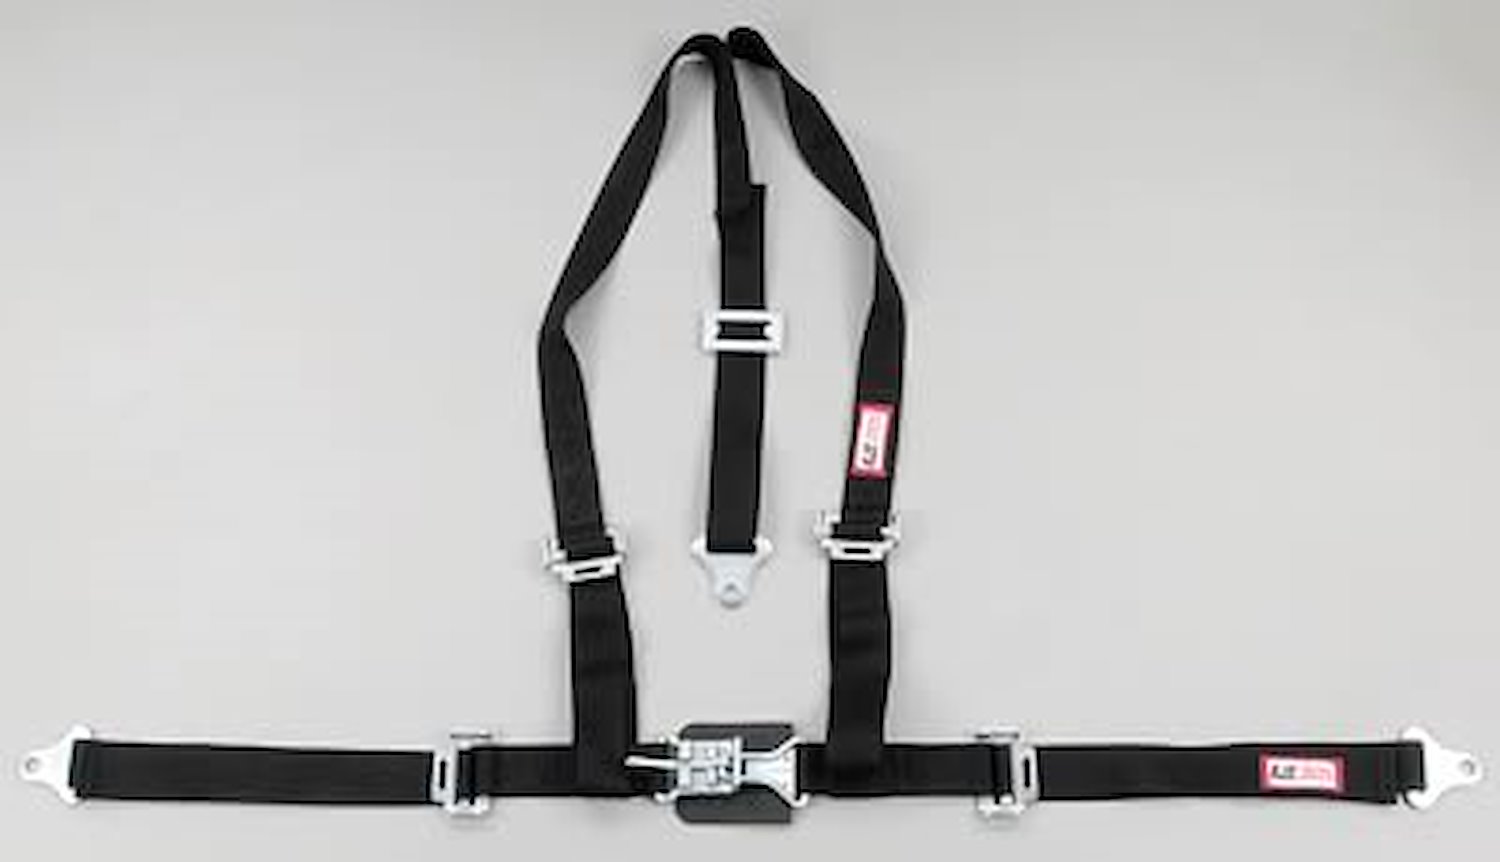 NON-SFI L&L HARNESS 3 PULL UP Lap Belt SEWN IN 2 S.H. Individual FLOOR Mount ALL WRAP ENDS RED